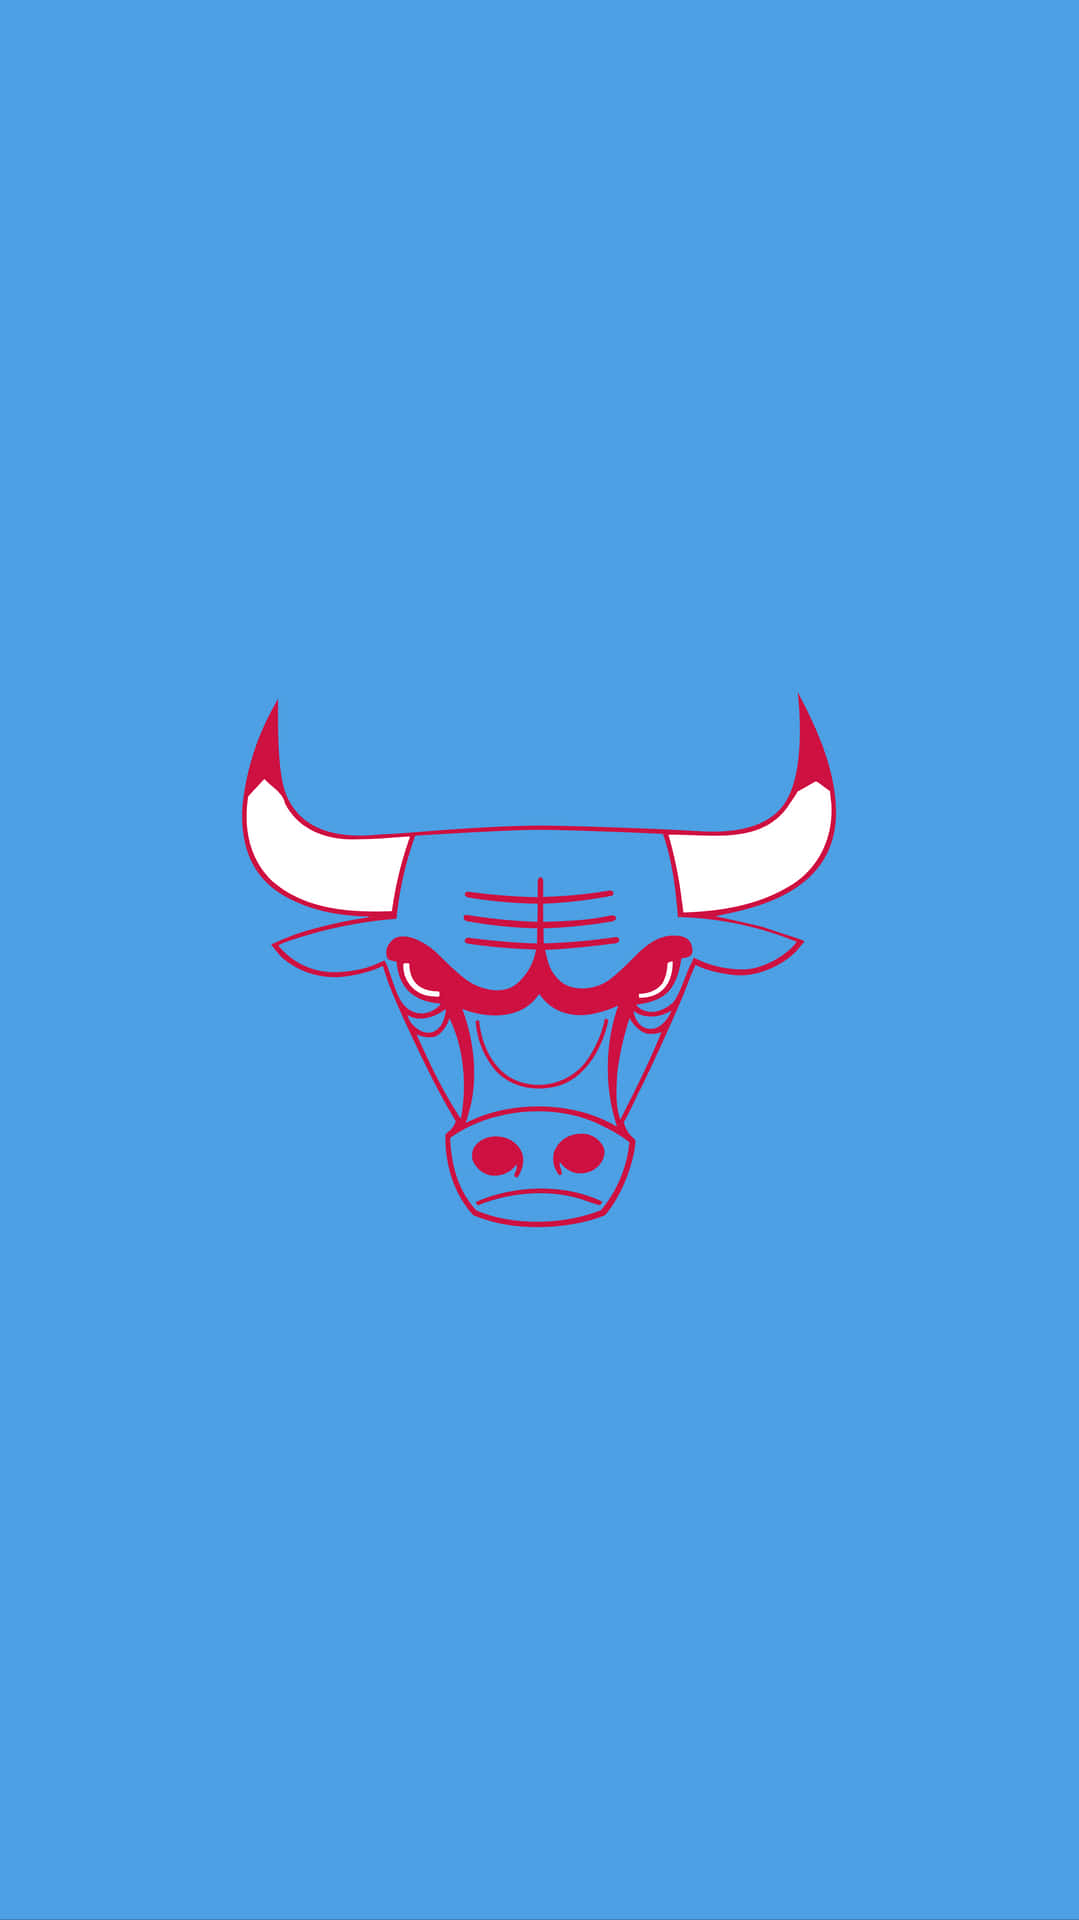 Get Ahead Of The Competition With This Snazzy Chicago Bulls Iphone Wallpaper Background